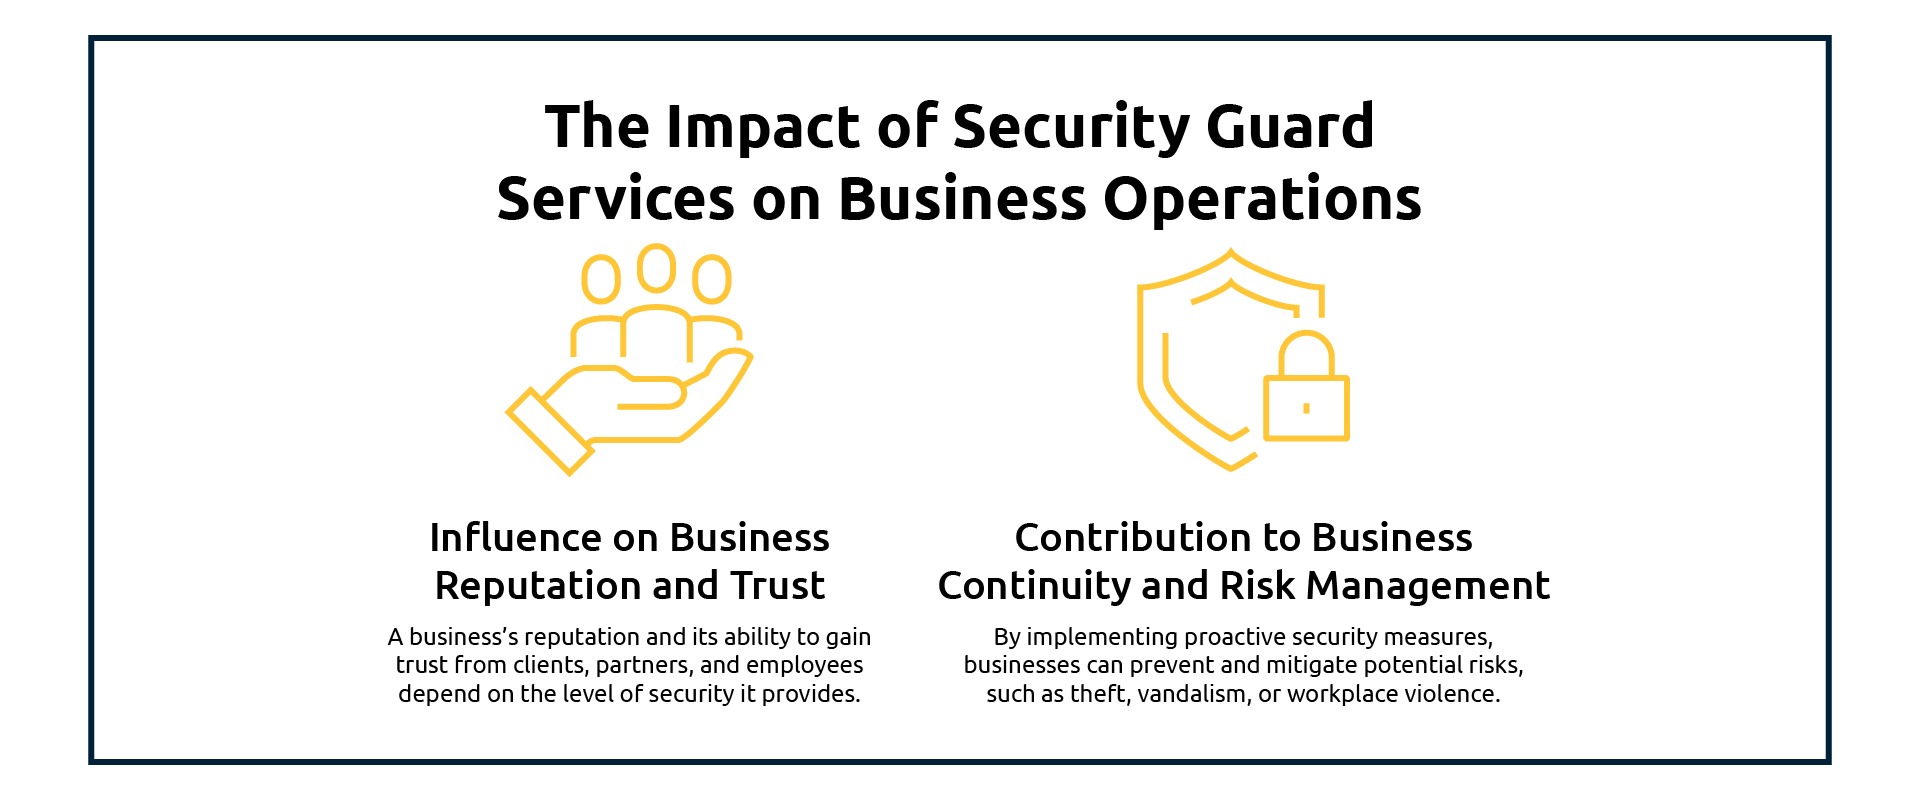 The Impact of Security Guard Services on Business Operations